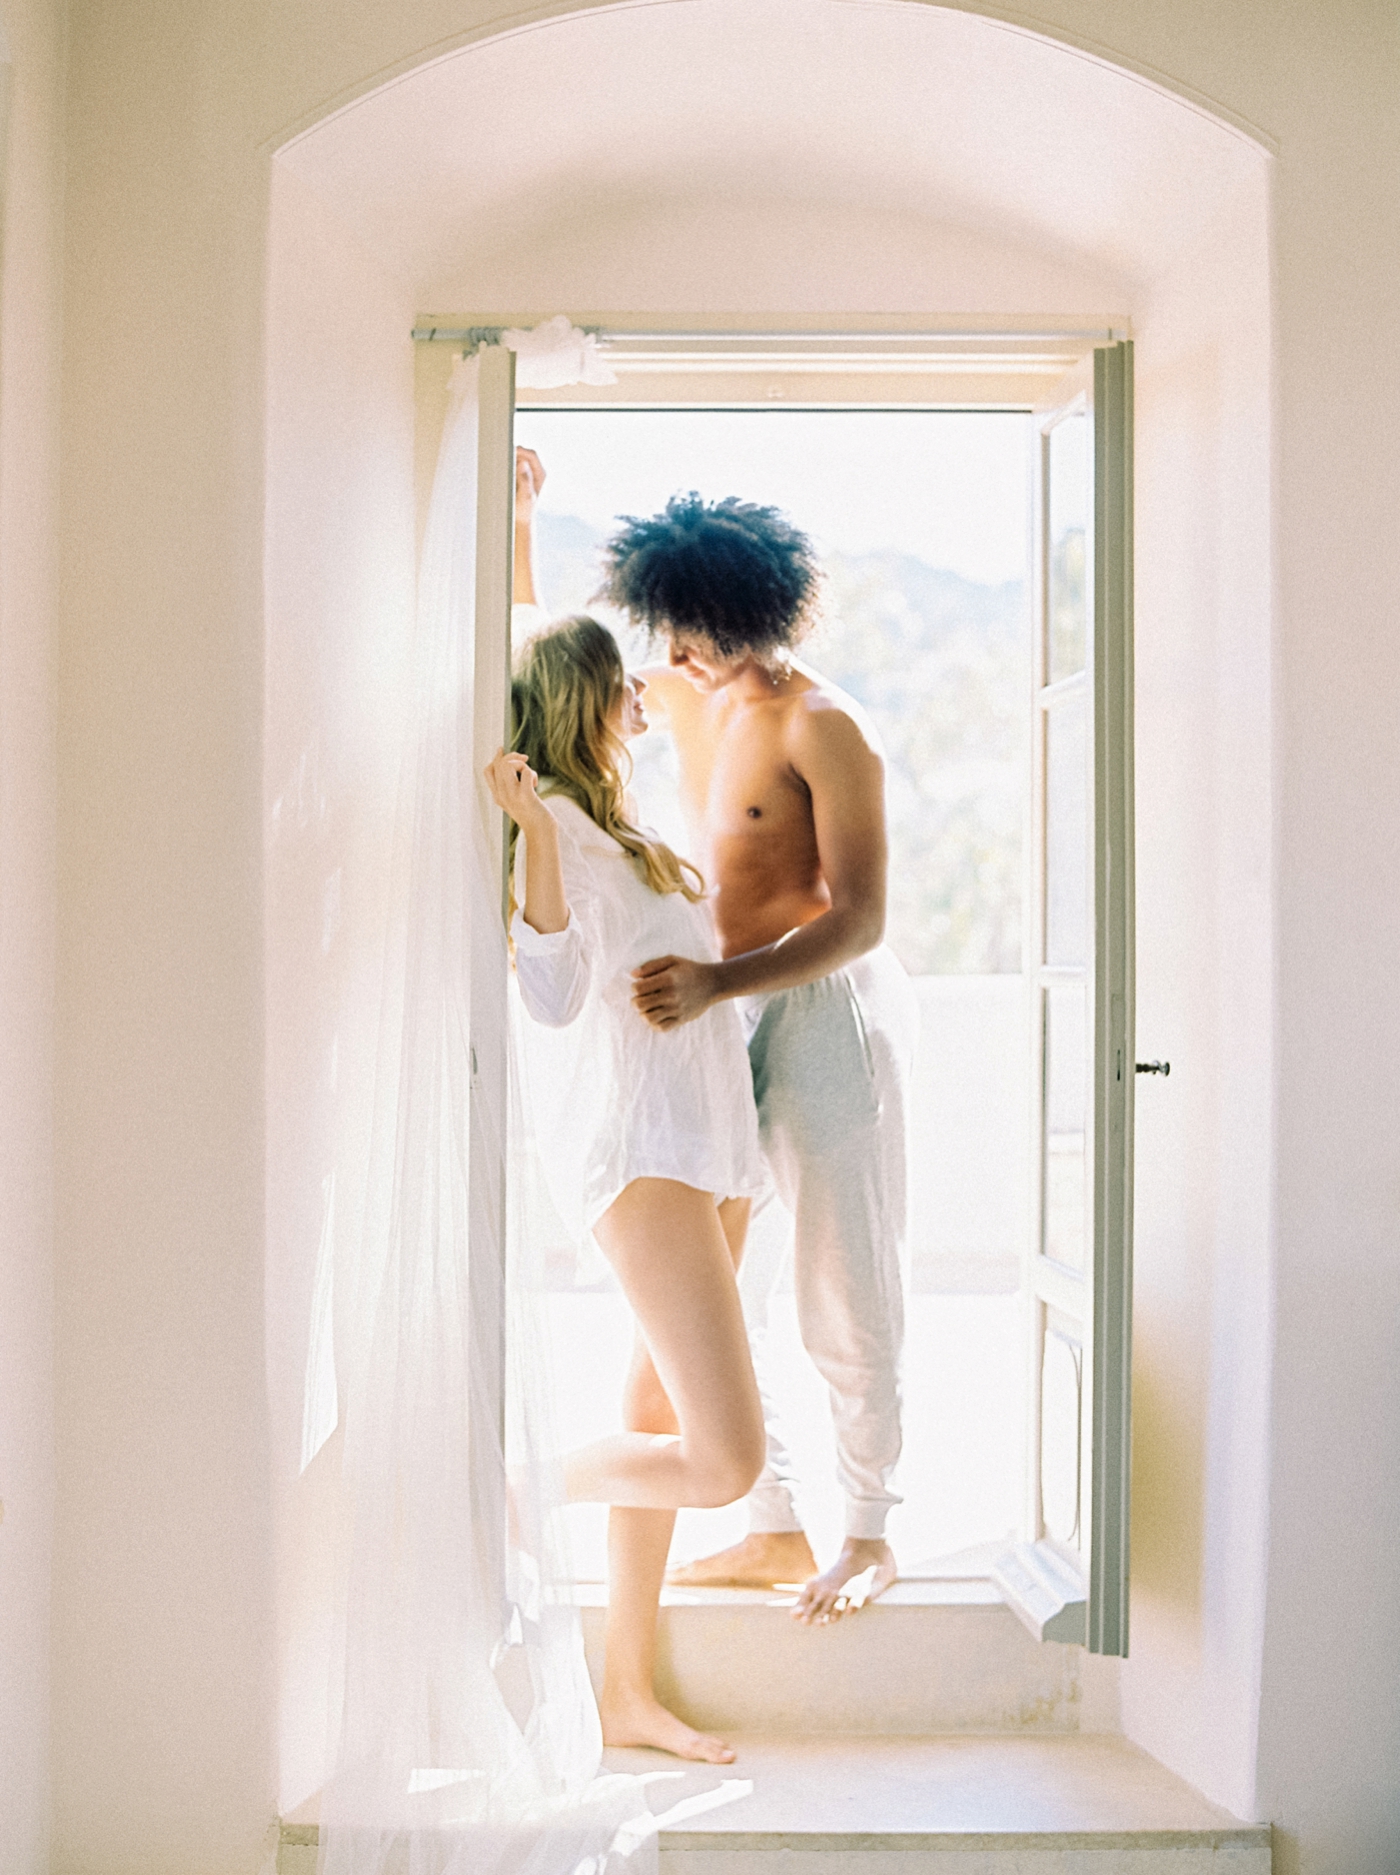 greece destination wedding photographer | intimate at home lifestyle session | engagement photo ideas | film photography 